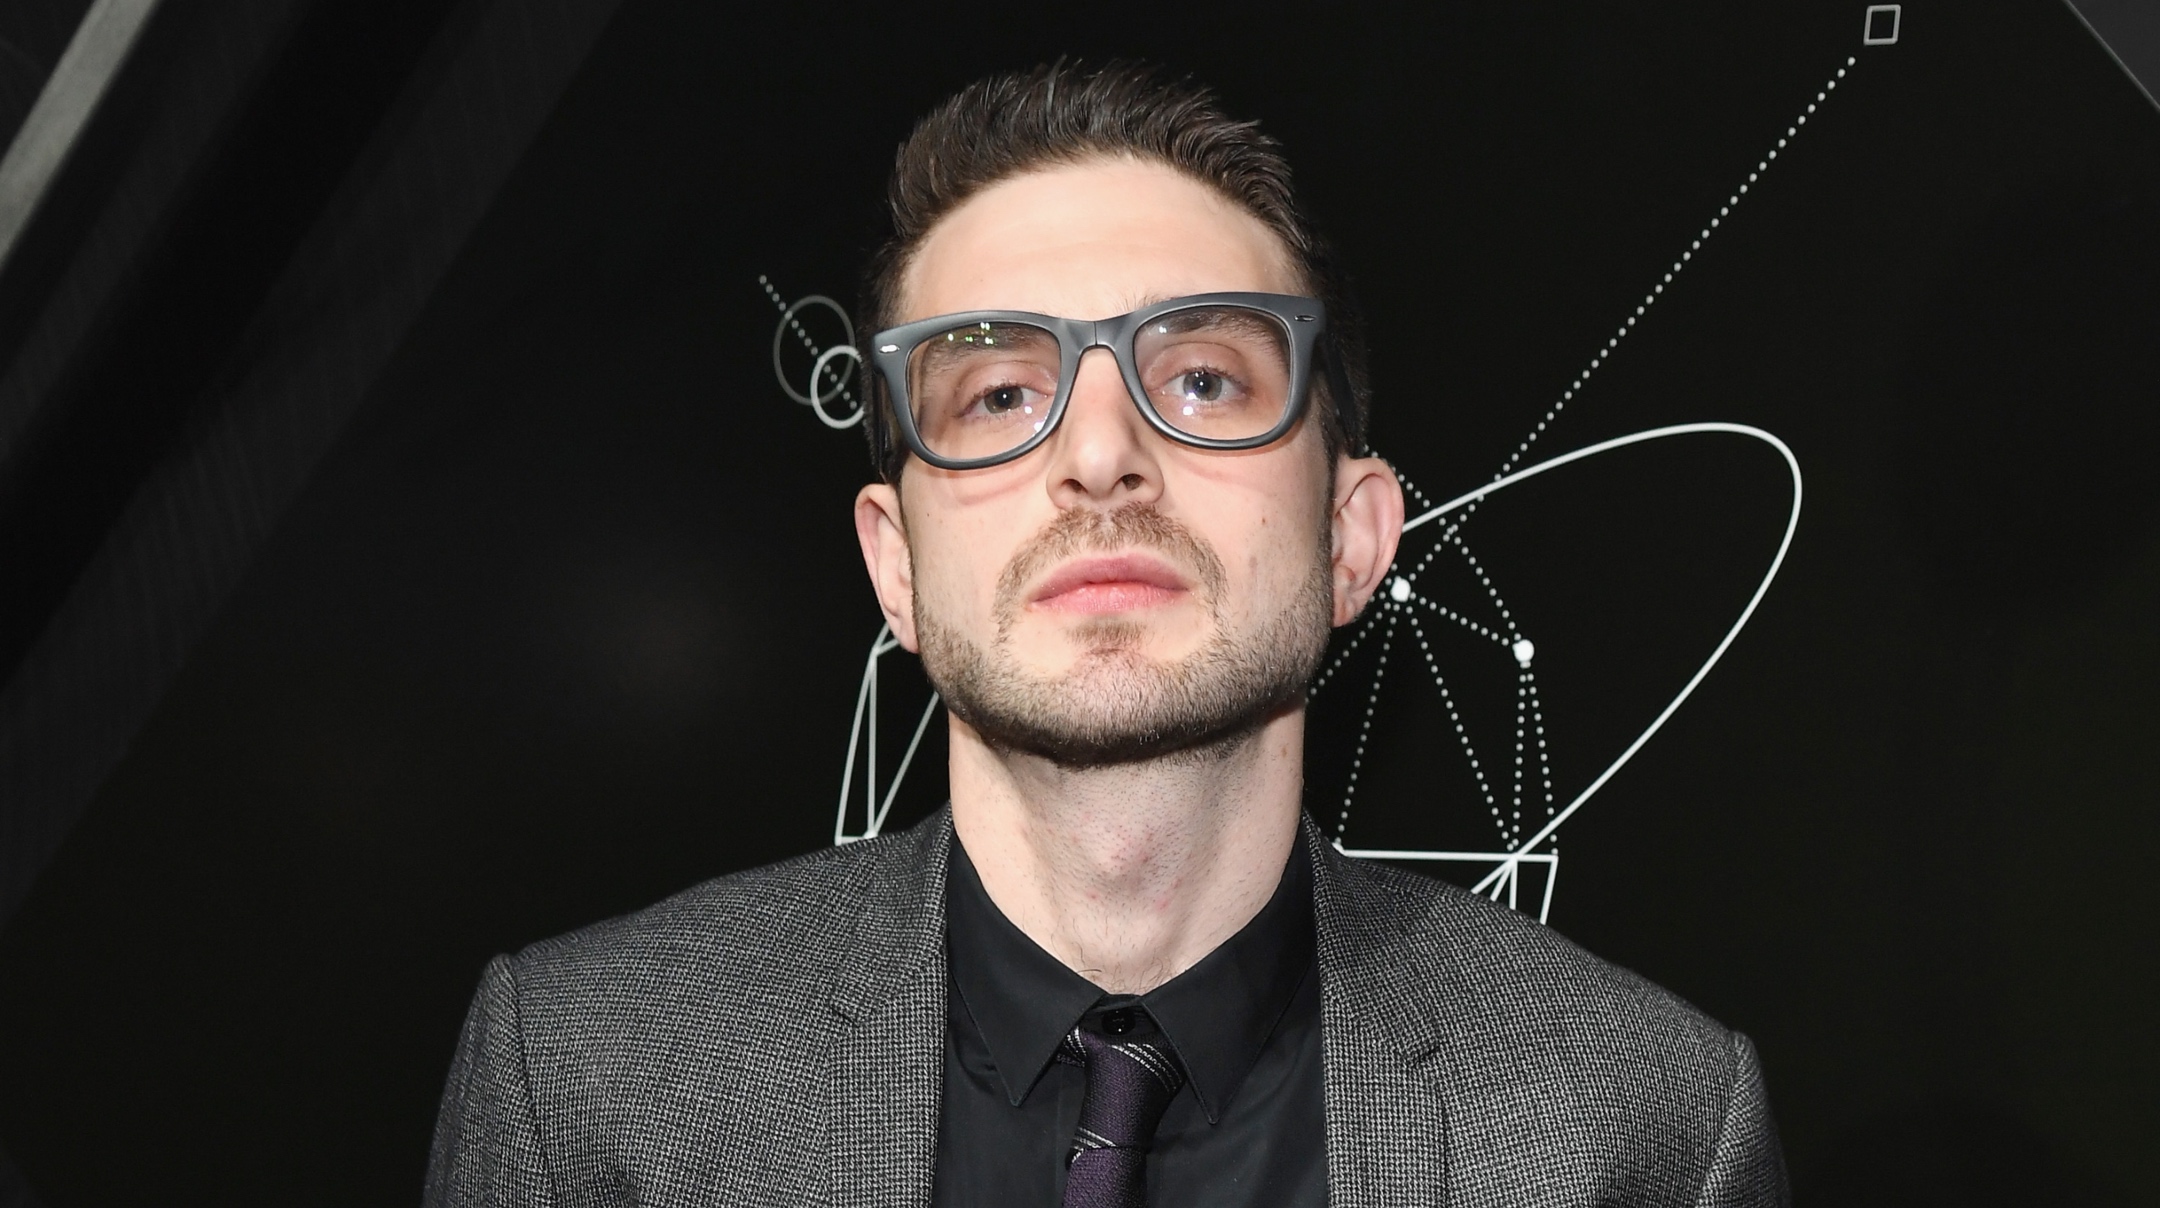 Alex Soros attends the Pencils of Promise 10th Anniversary Gala at the Duggal Greenhouse in New York City, Oct. 24, 2018 in New York City. (Kevin Mazur/Getty Images for Pencils Of Promise)